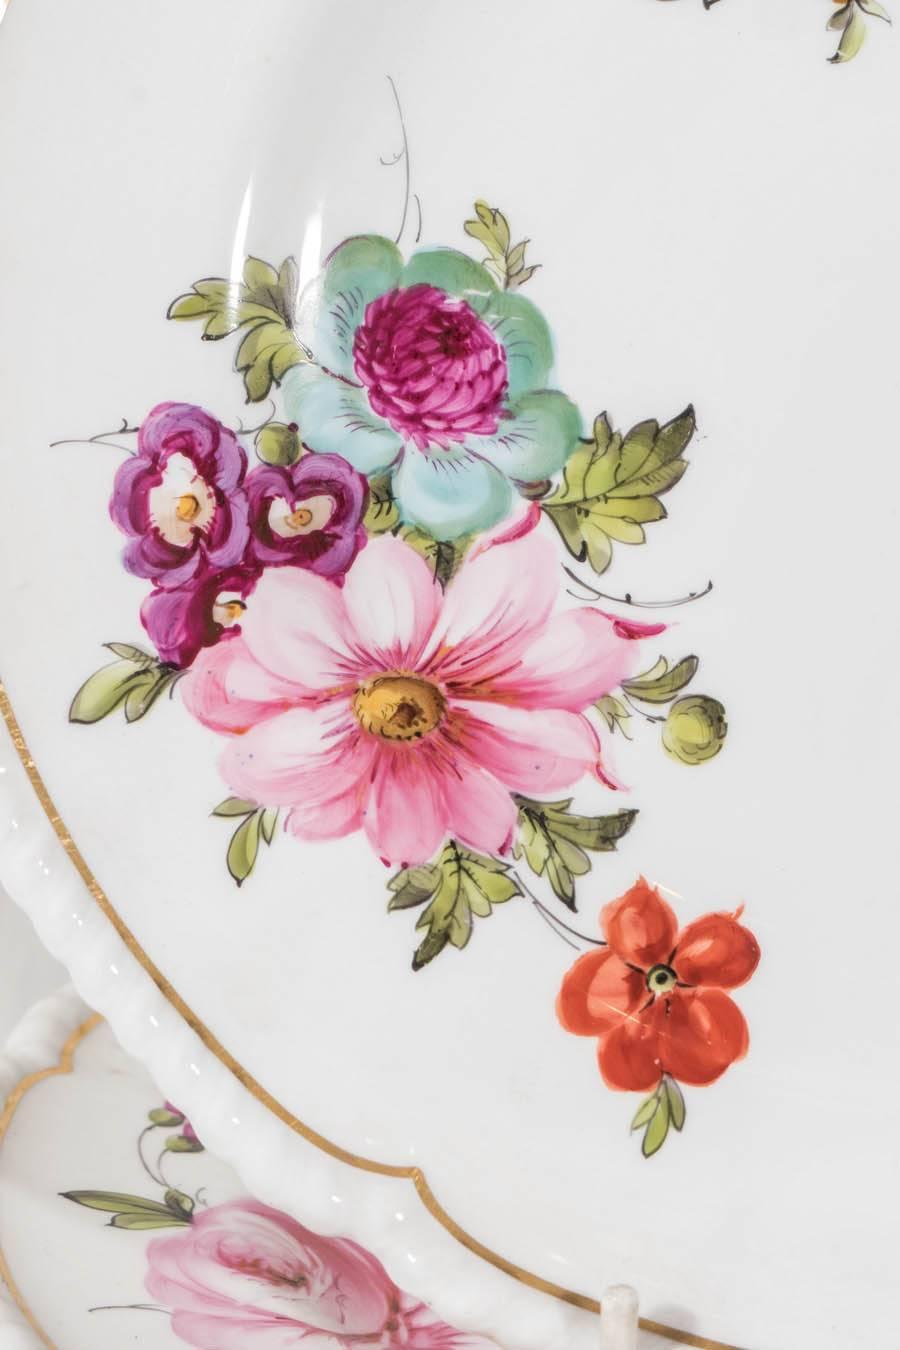 A lovely set of 19th century Royal Crown Derby dishes each with beautiful hand-painted flowers in vibrant colors. With a gilt lined border and slightly lobed and gadrooned edge. The plate has a diameter of 10.25" which is a wonderful large size